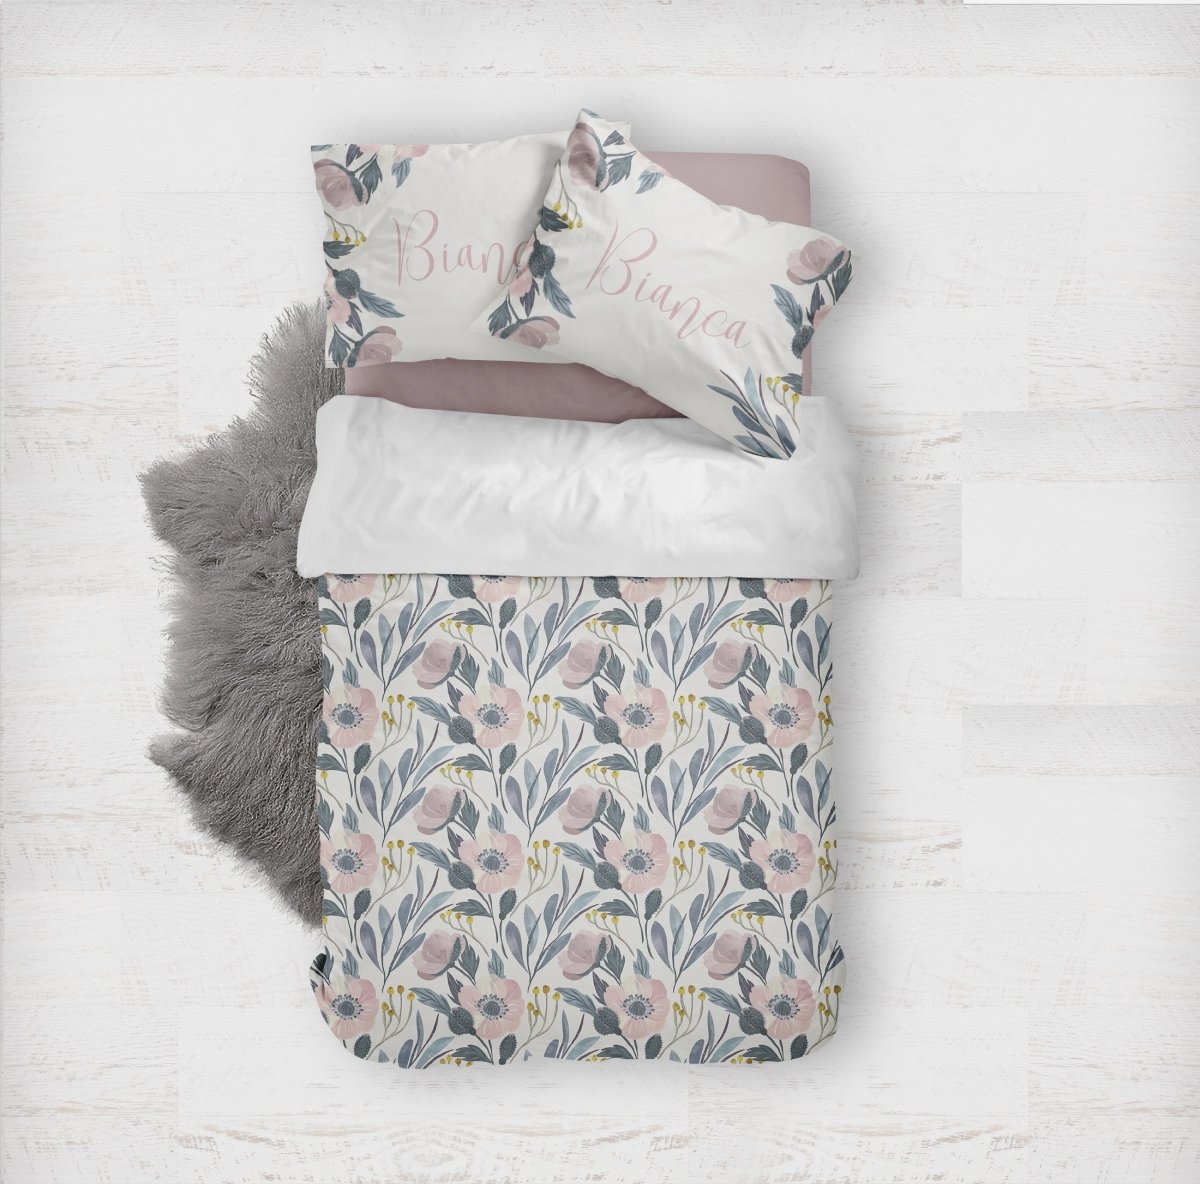 Moody Floral Personalized Big Kid Bedding Set - gender_girl, Moody Floral, text